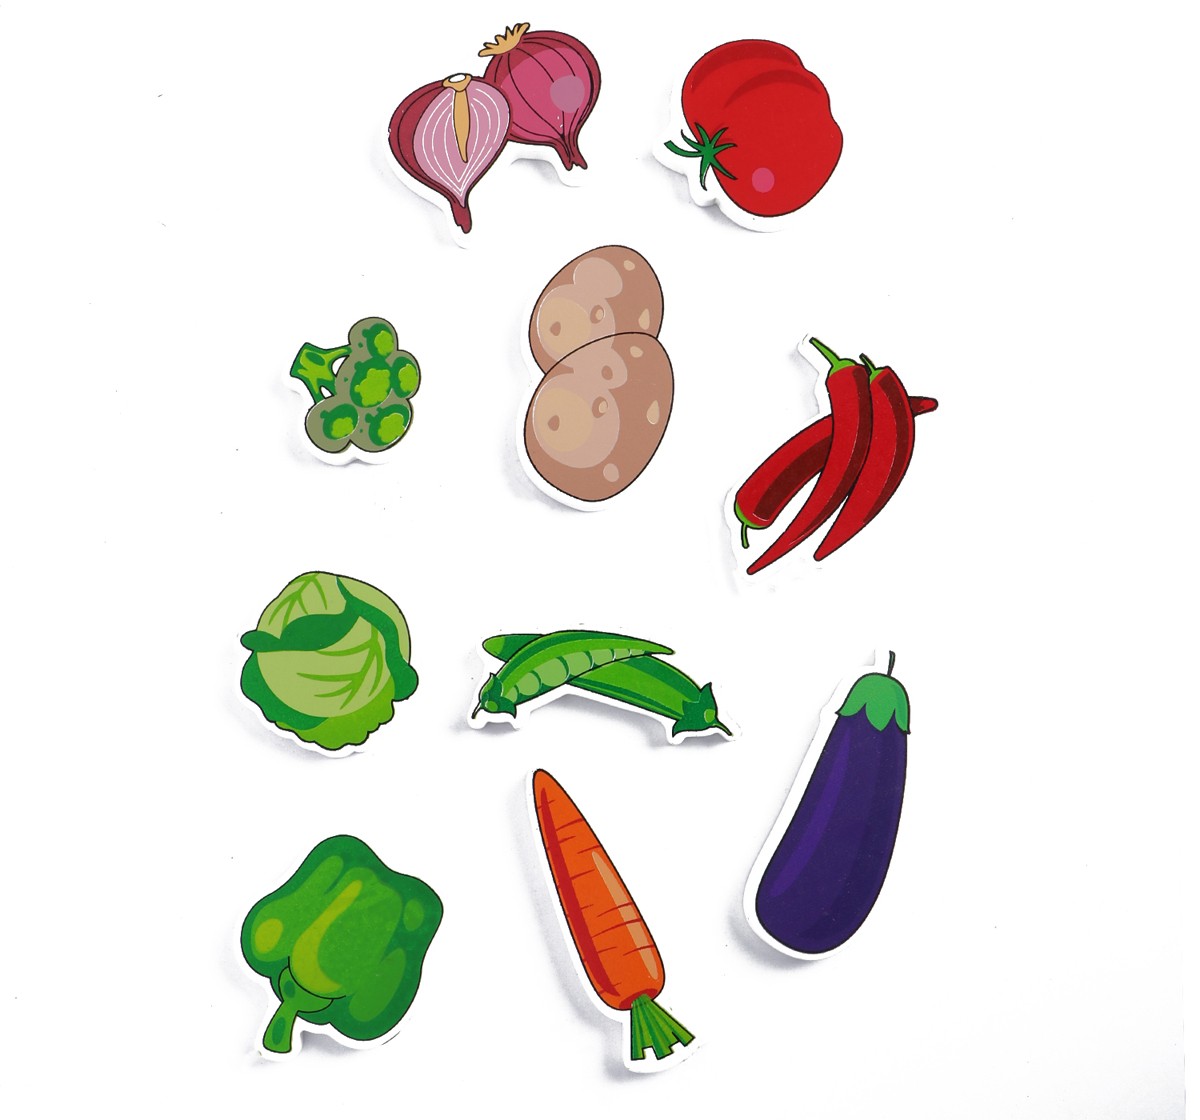 Shooting Star Vegetables Puzzle Raised Chunky Multicolour 3Y+